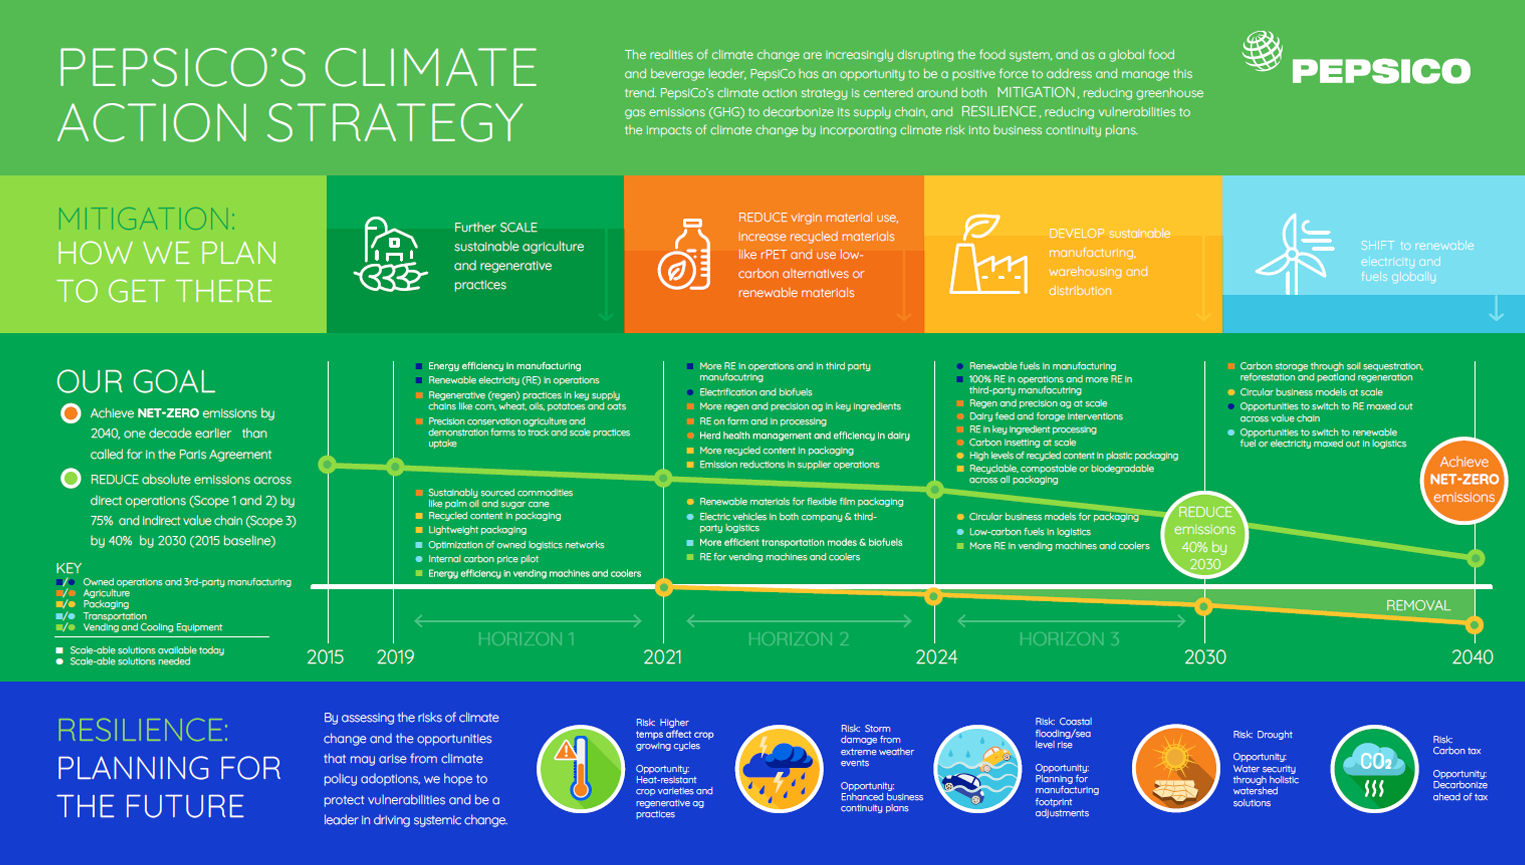 PepsiCo’s climate action strategy centers around MITIGATION, reducing greenhouse gas emissions to decarbonize its supply chain, and RESILIENCE, reducing vulnerabilities to climate change impacts by incorporating climate risk into business plans.